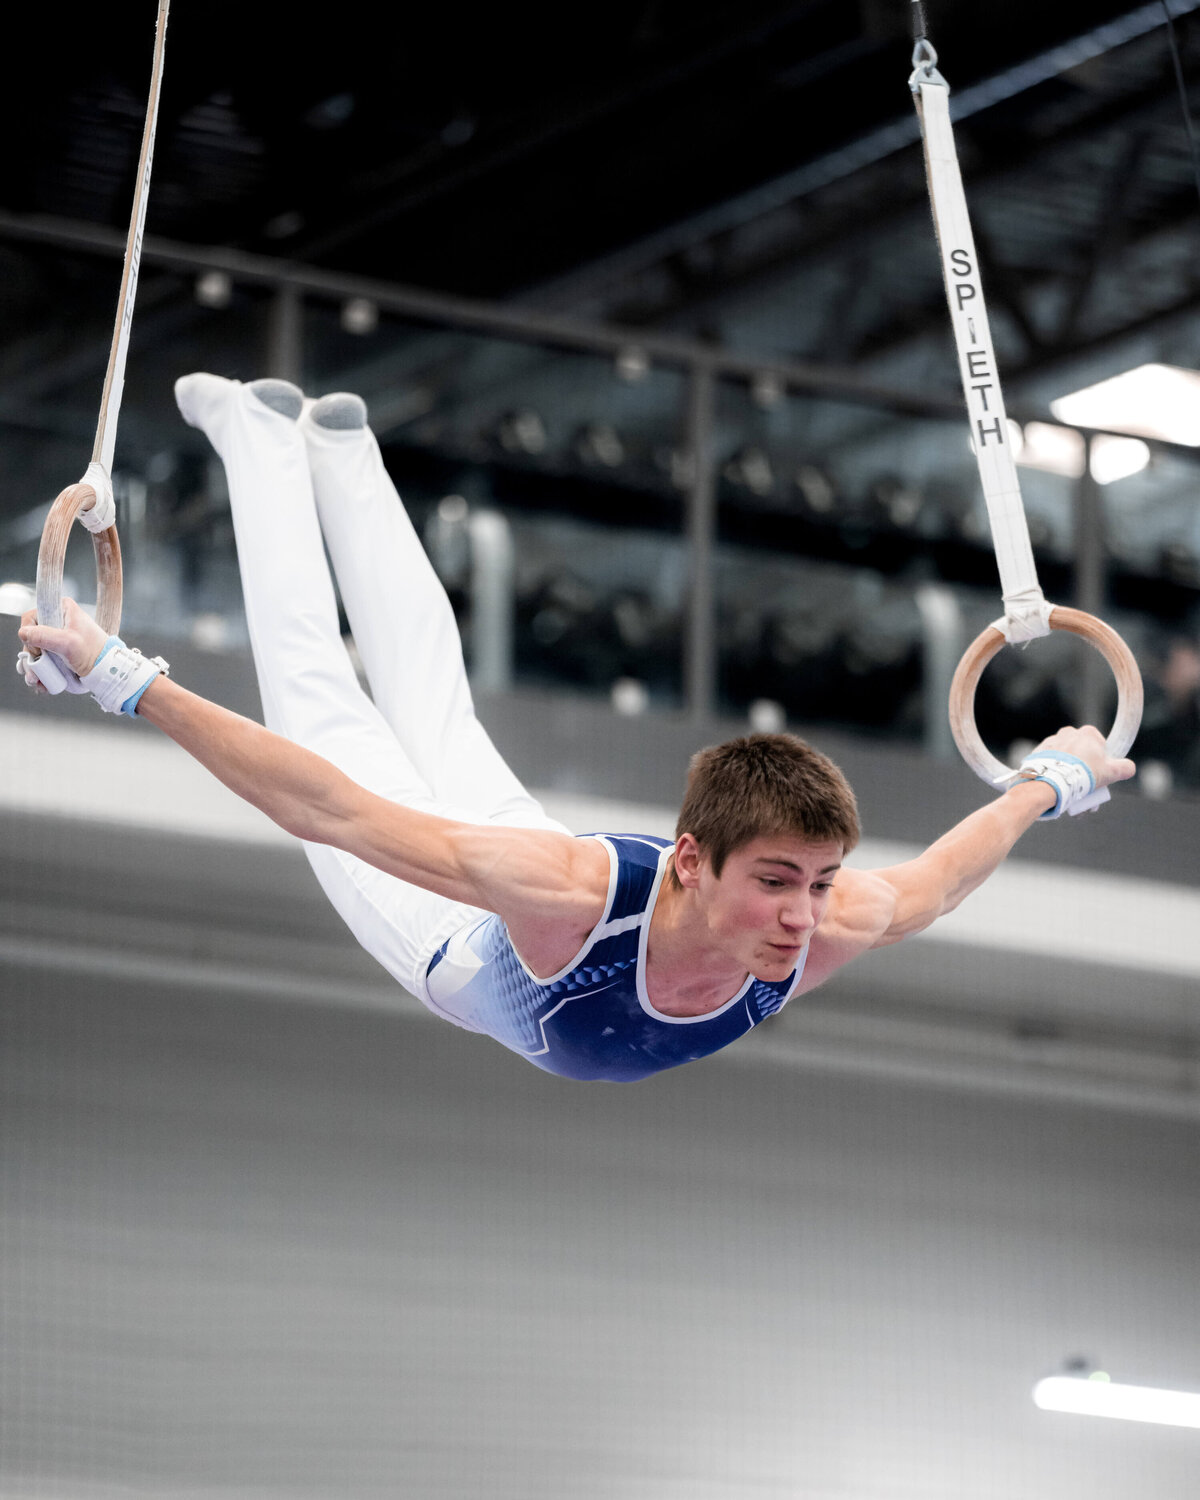 Photo by Luke O'Geil taken at the 2023 inaugural Grizzly Classic men's artistic gymnastics competitionA1_04034